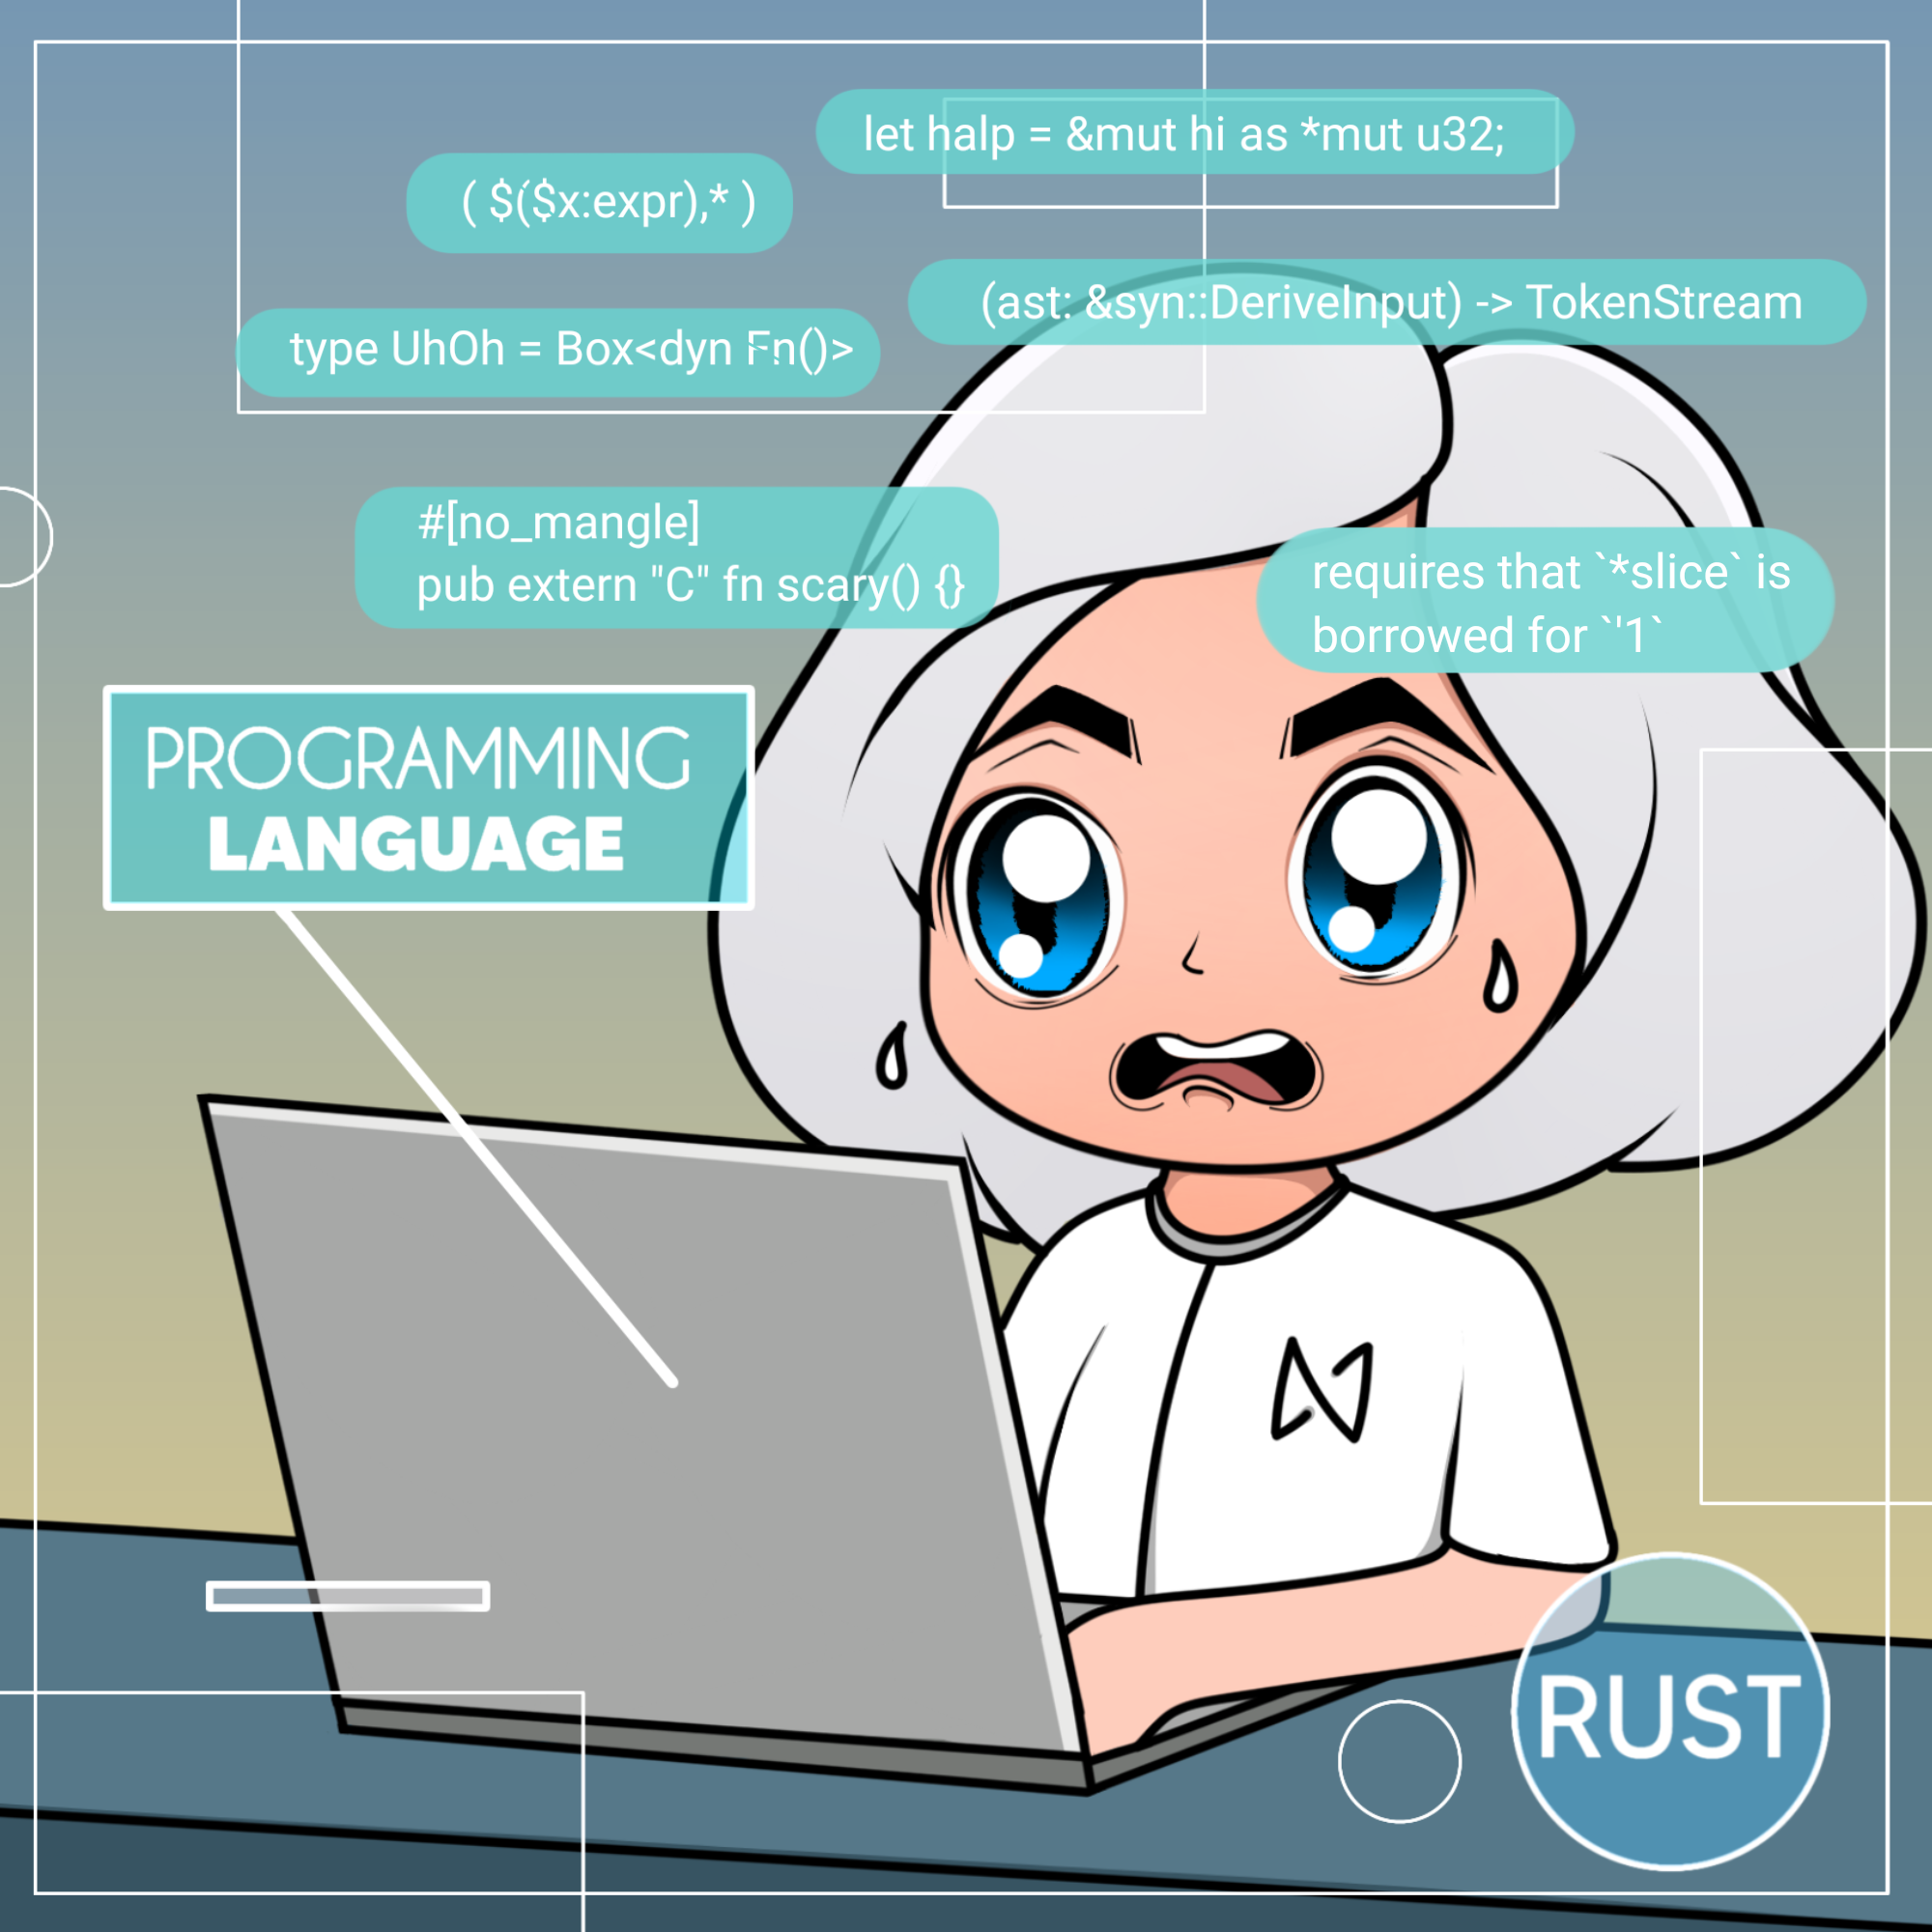 Programmer looking at Rust code and looking worried. Art created by ksart.near